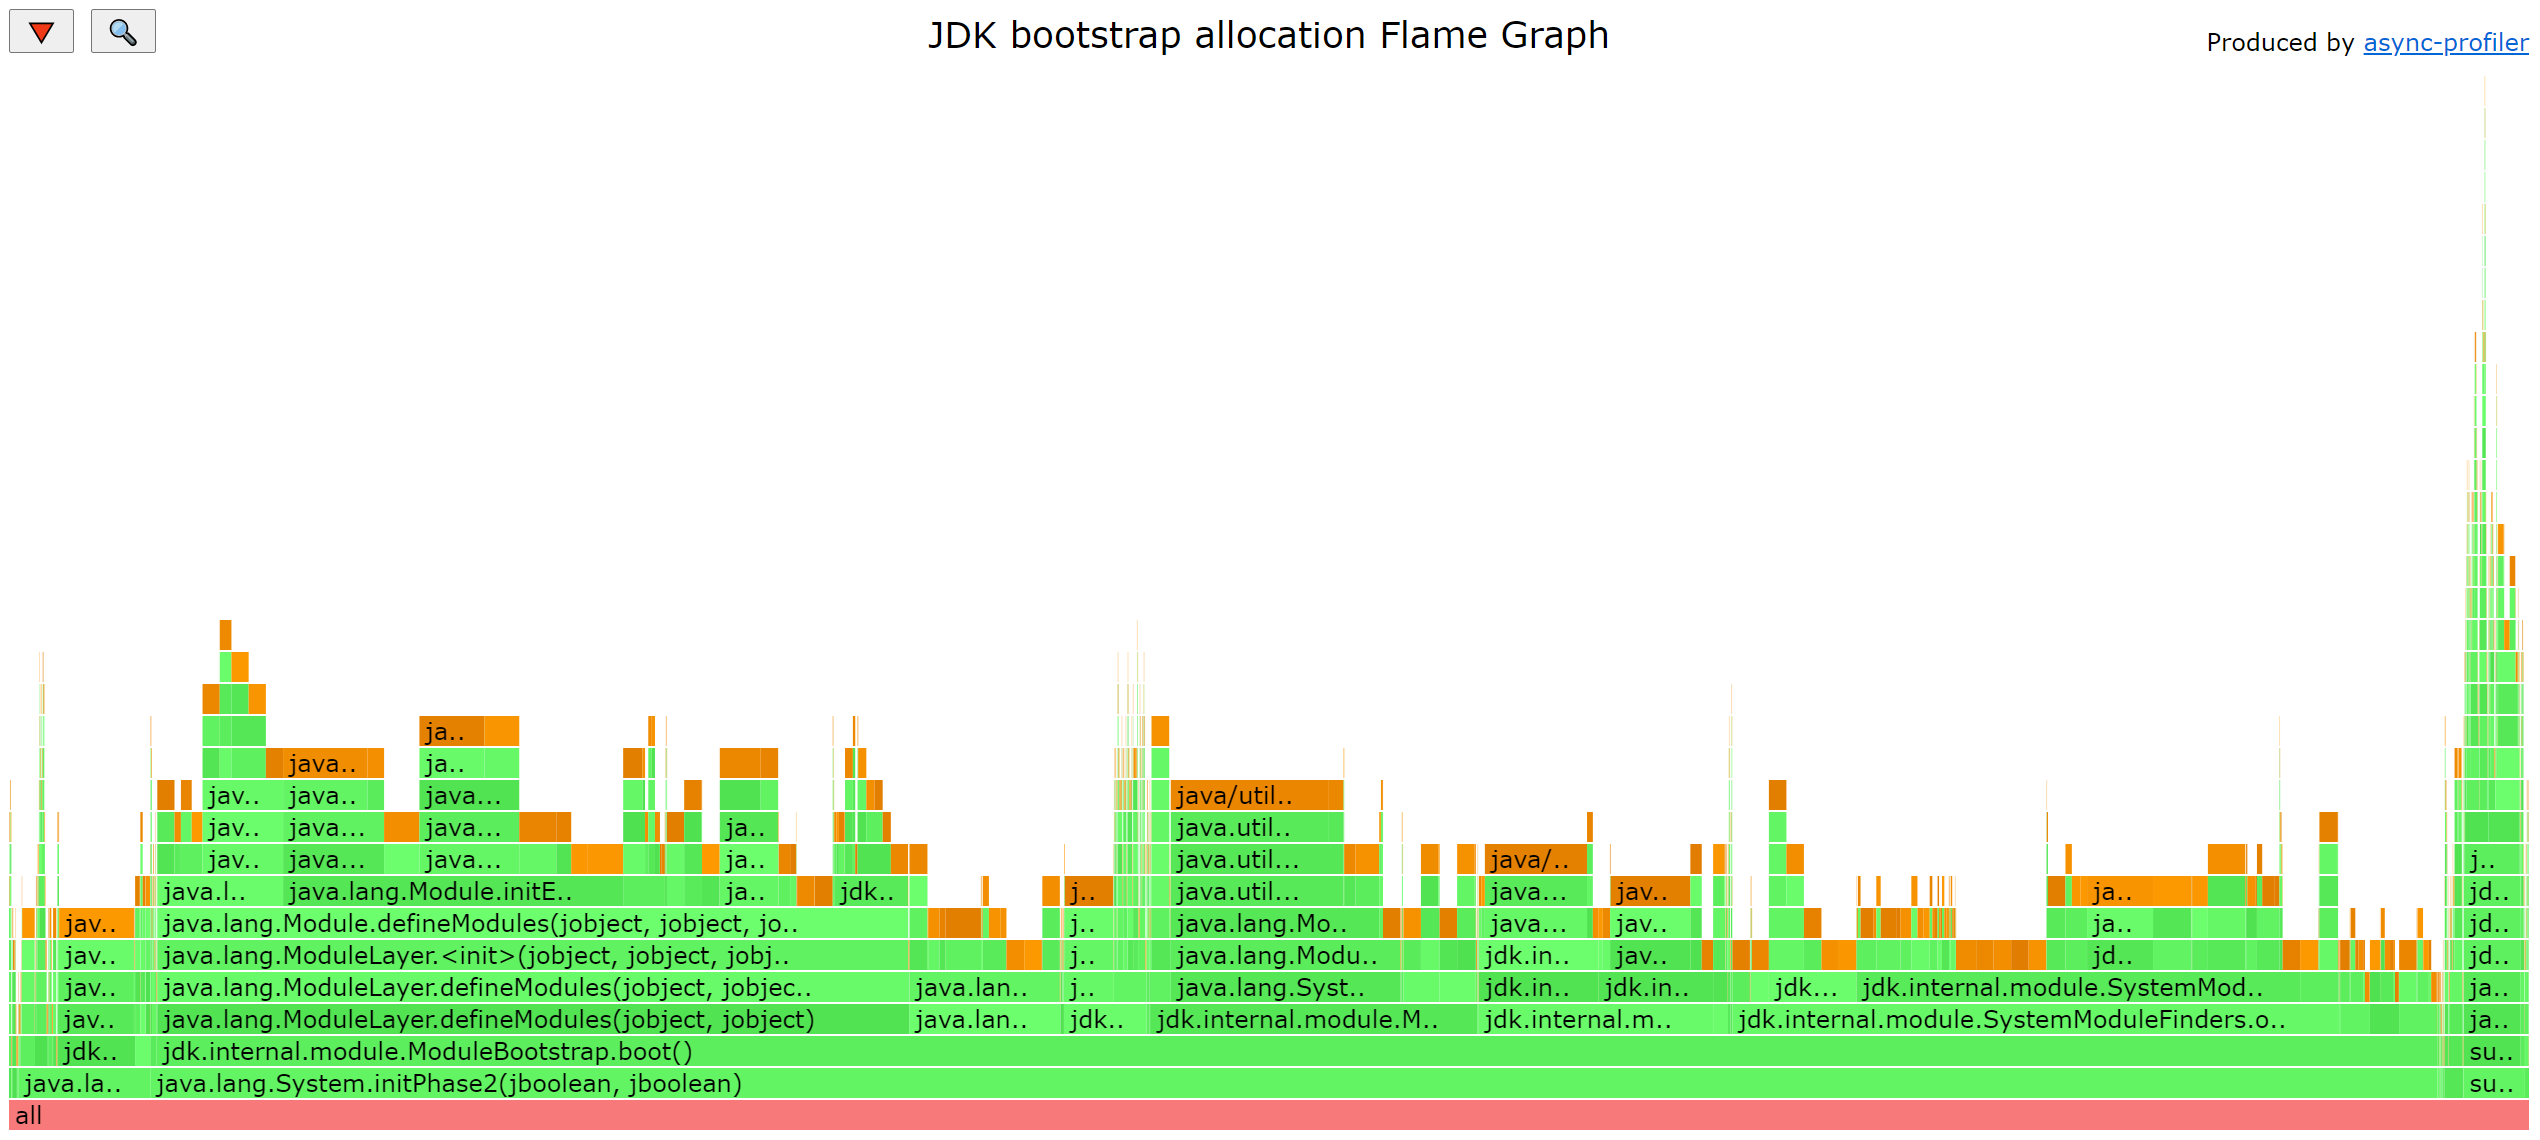 JDK bootstrap allocation Flame Graph